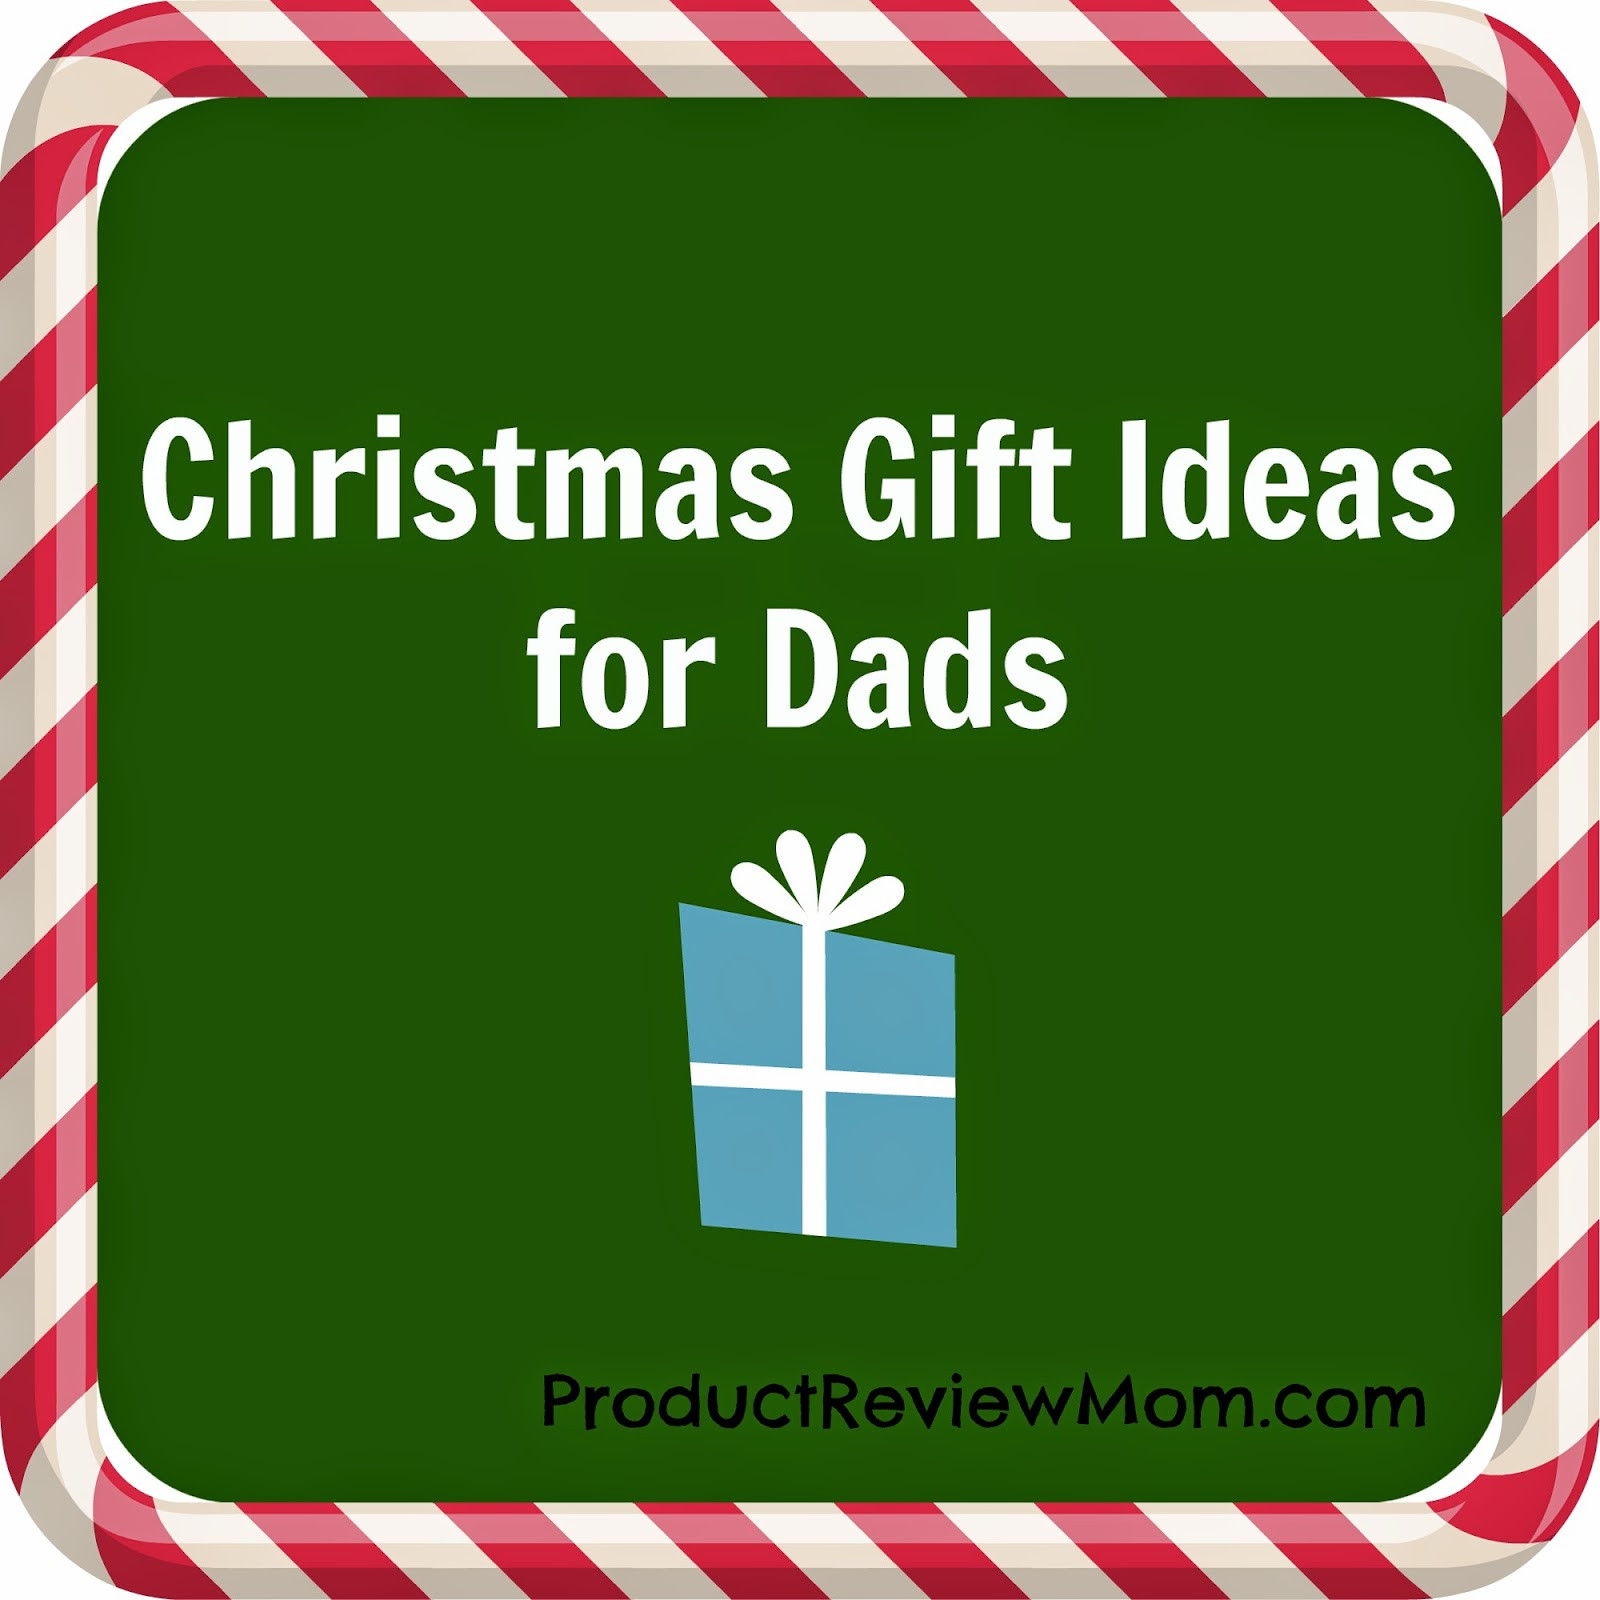 Christmas Gift Ideas For Dads
 Christmas Gift Ideas for Dads HolidayGiftGuide